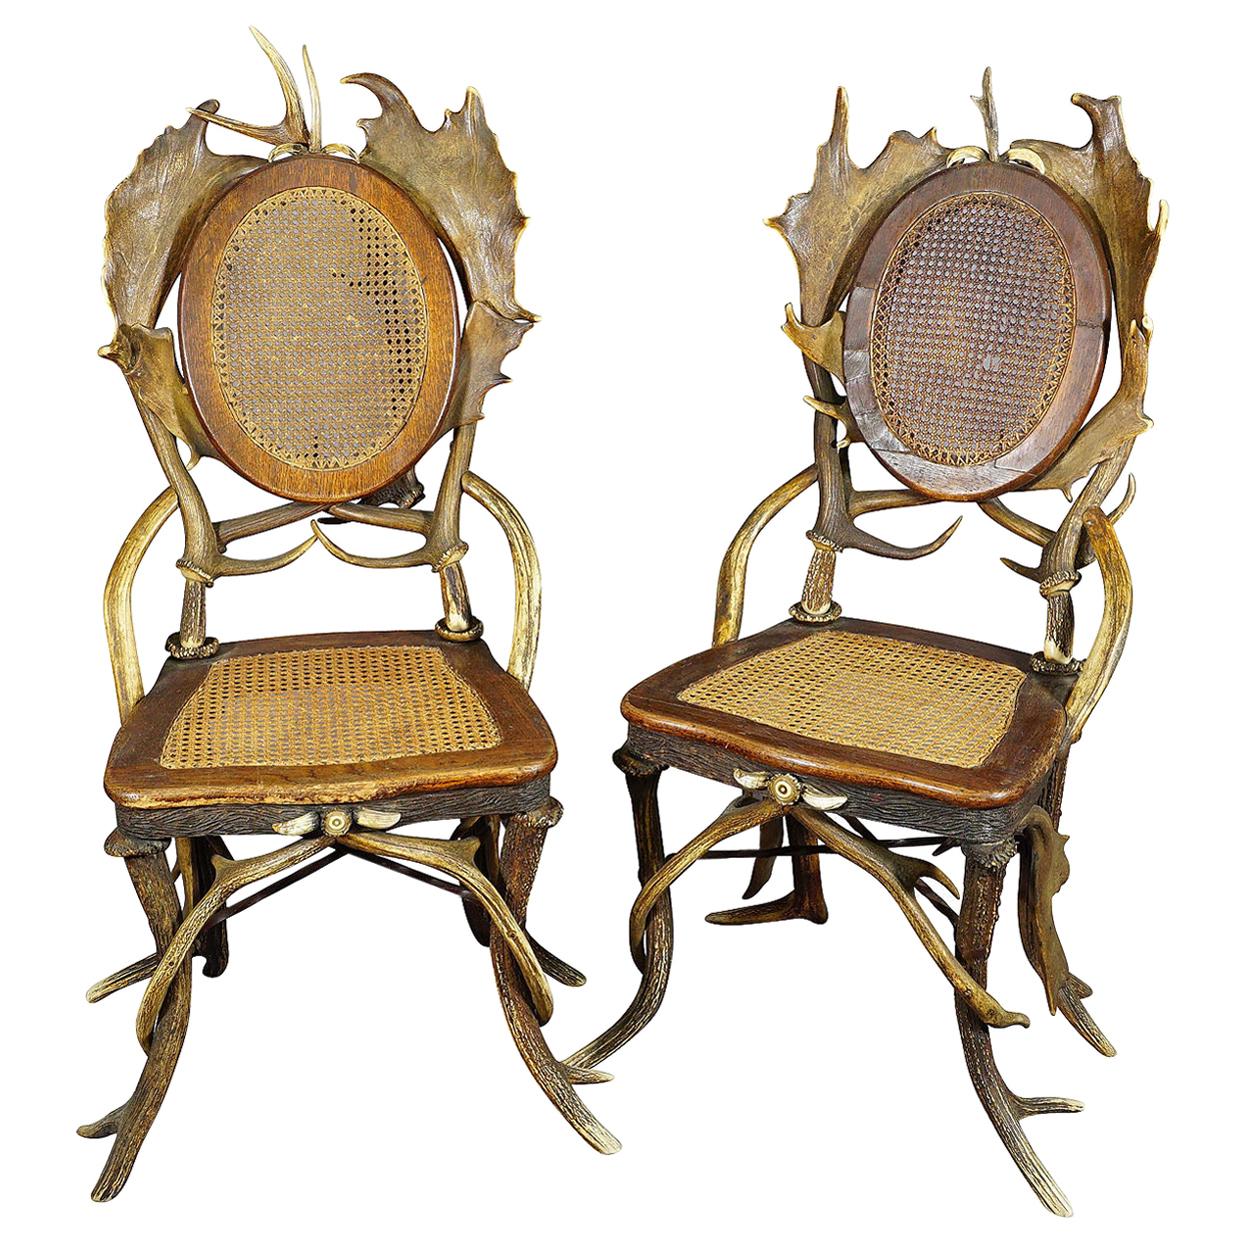 Pair of Antique Rustic Antler Parlor Chairs, Germany, circa 1900